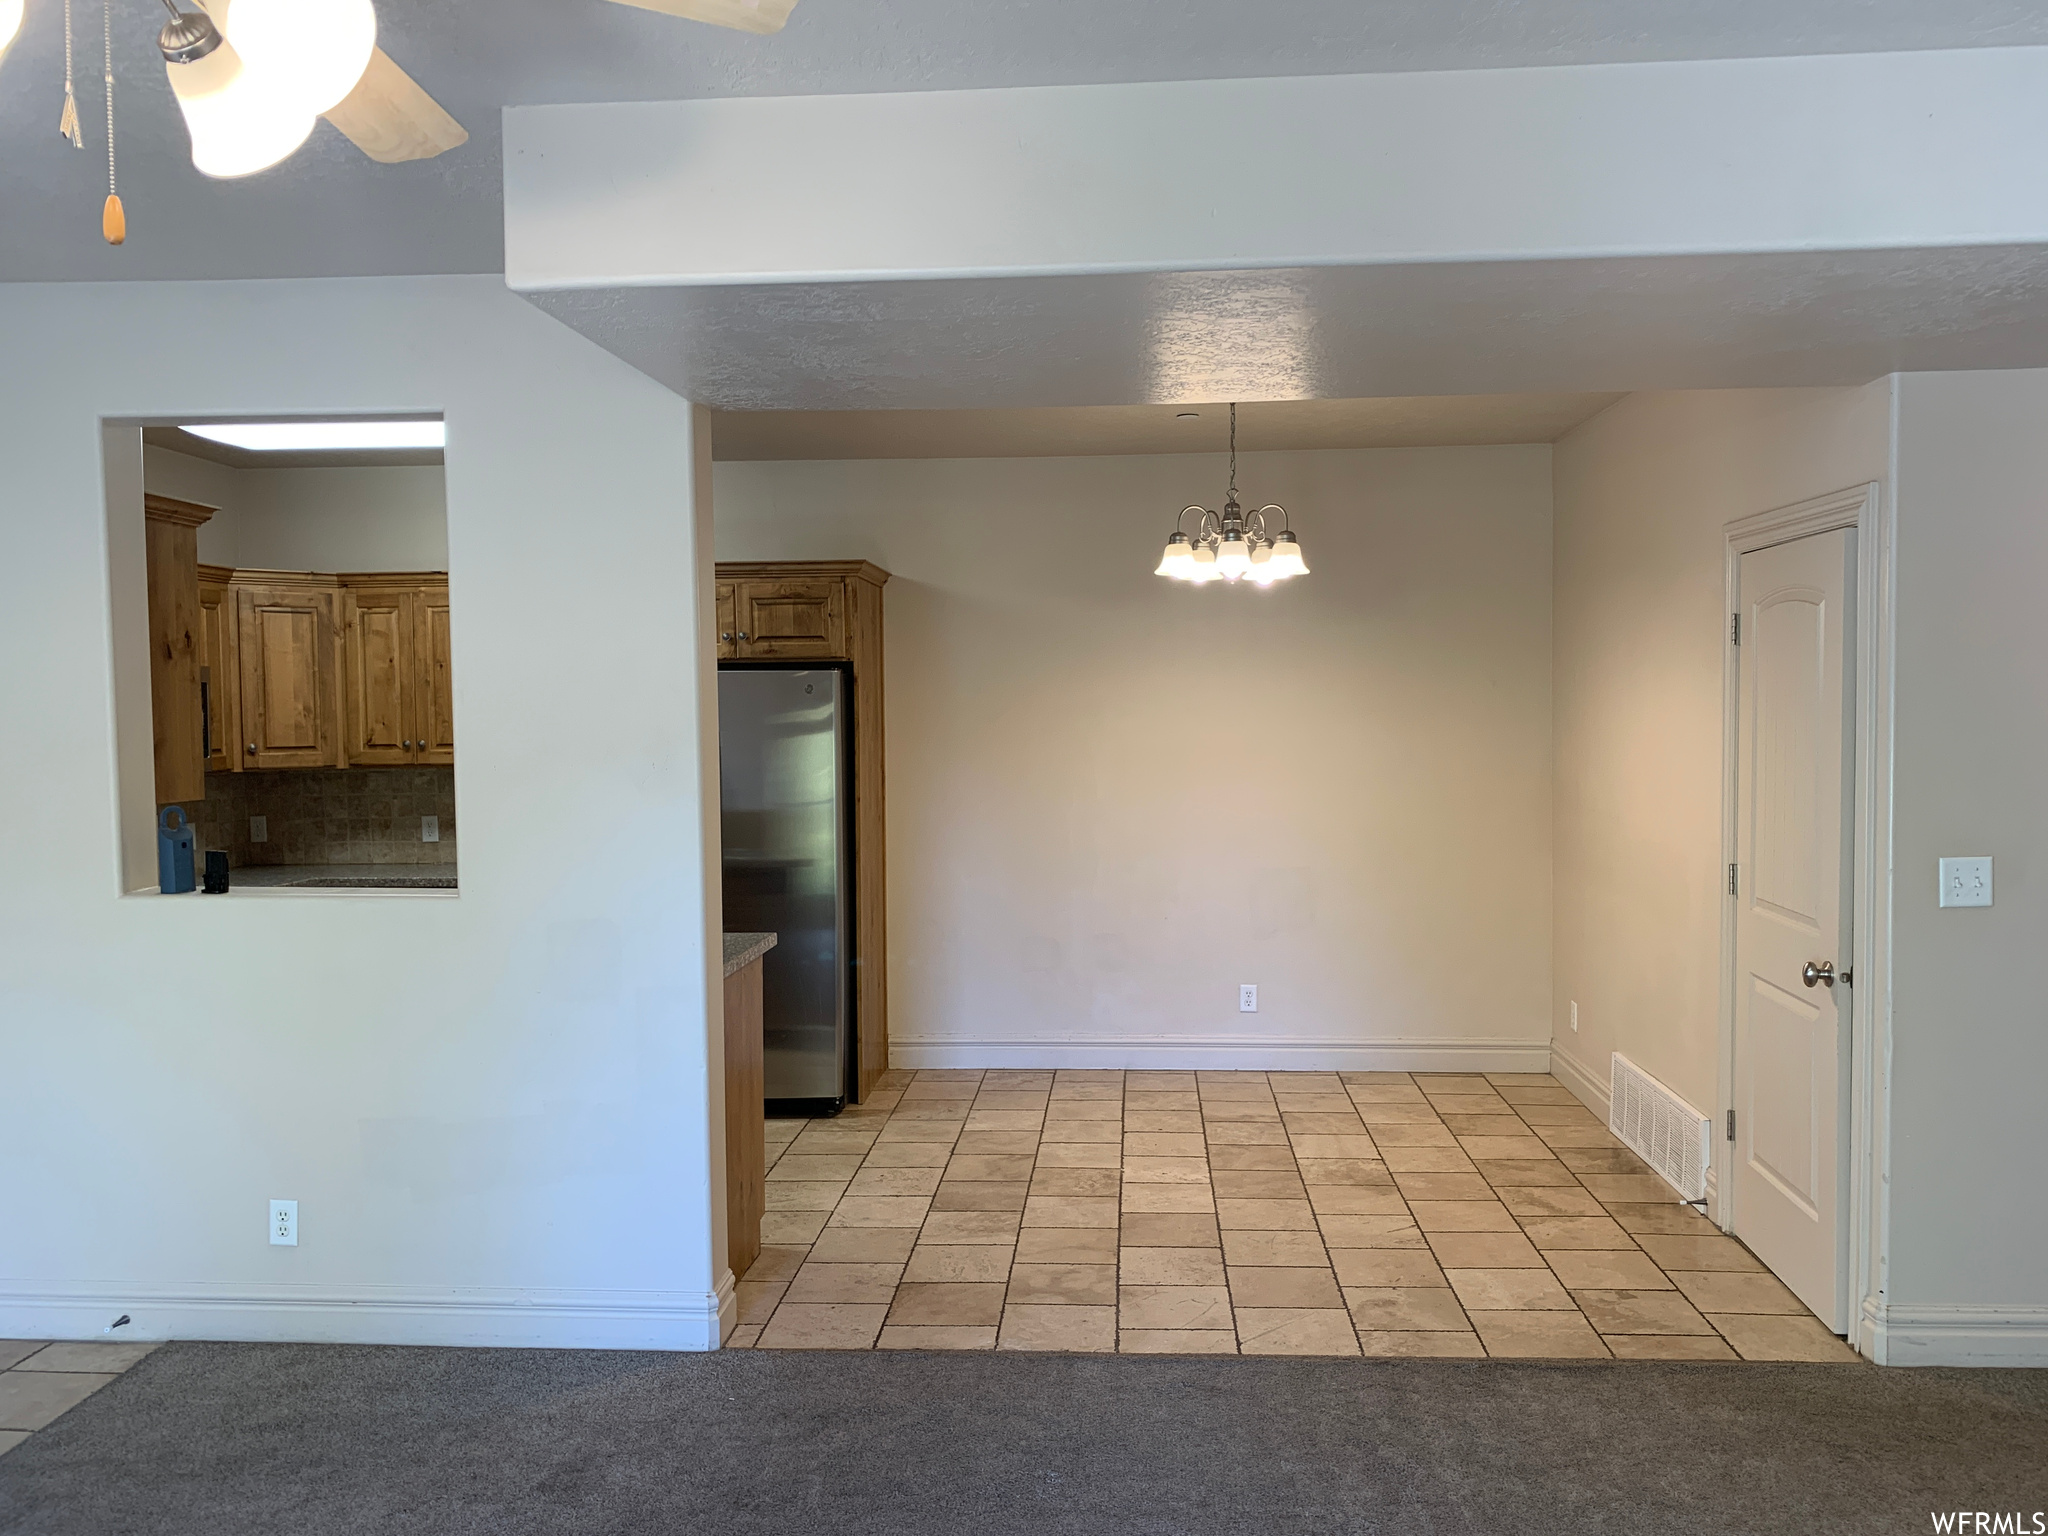 Kitchen with light carpet, backsplash, stainless steel refrigerator, and ceiling fan